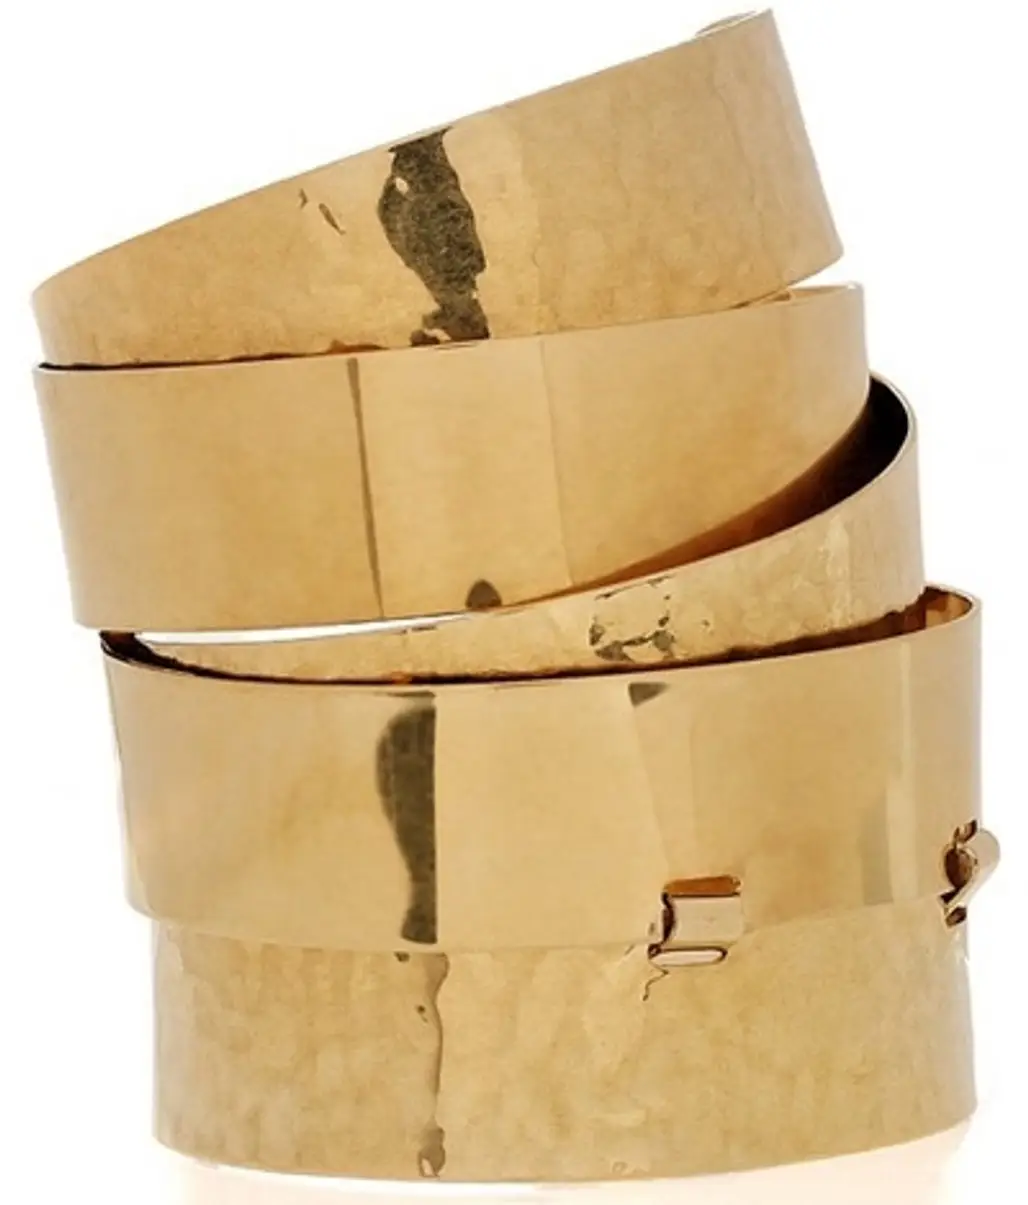 Etro Hammered Gold-Plated Cuff